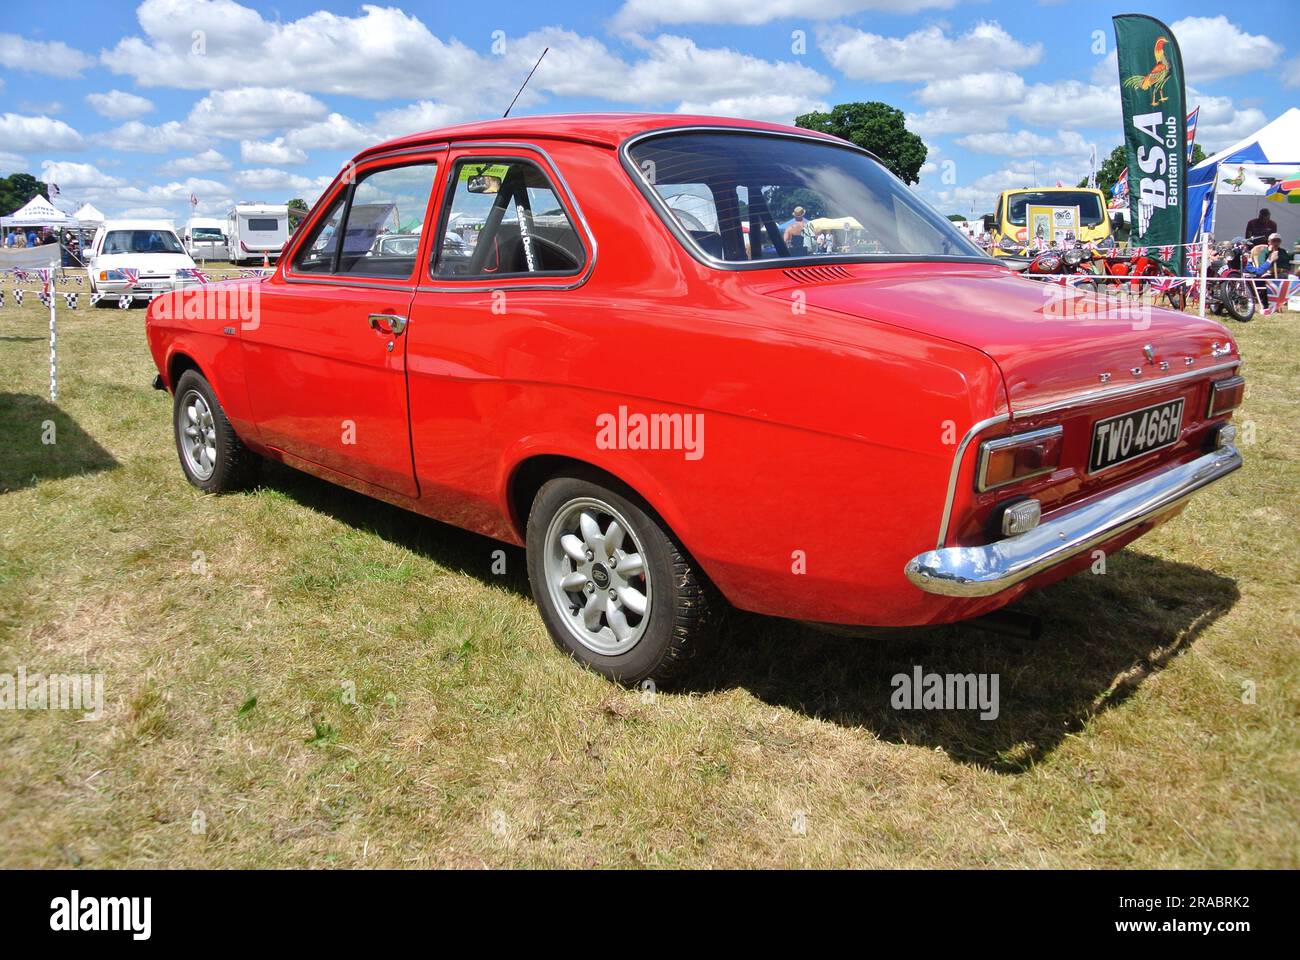 A Mk1 Ford Escort parked on display at the 47th Historic Vehicle Gathering, Powderham, Devon, England, UK. Stock Photo